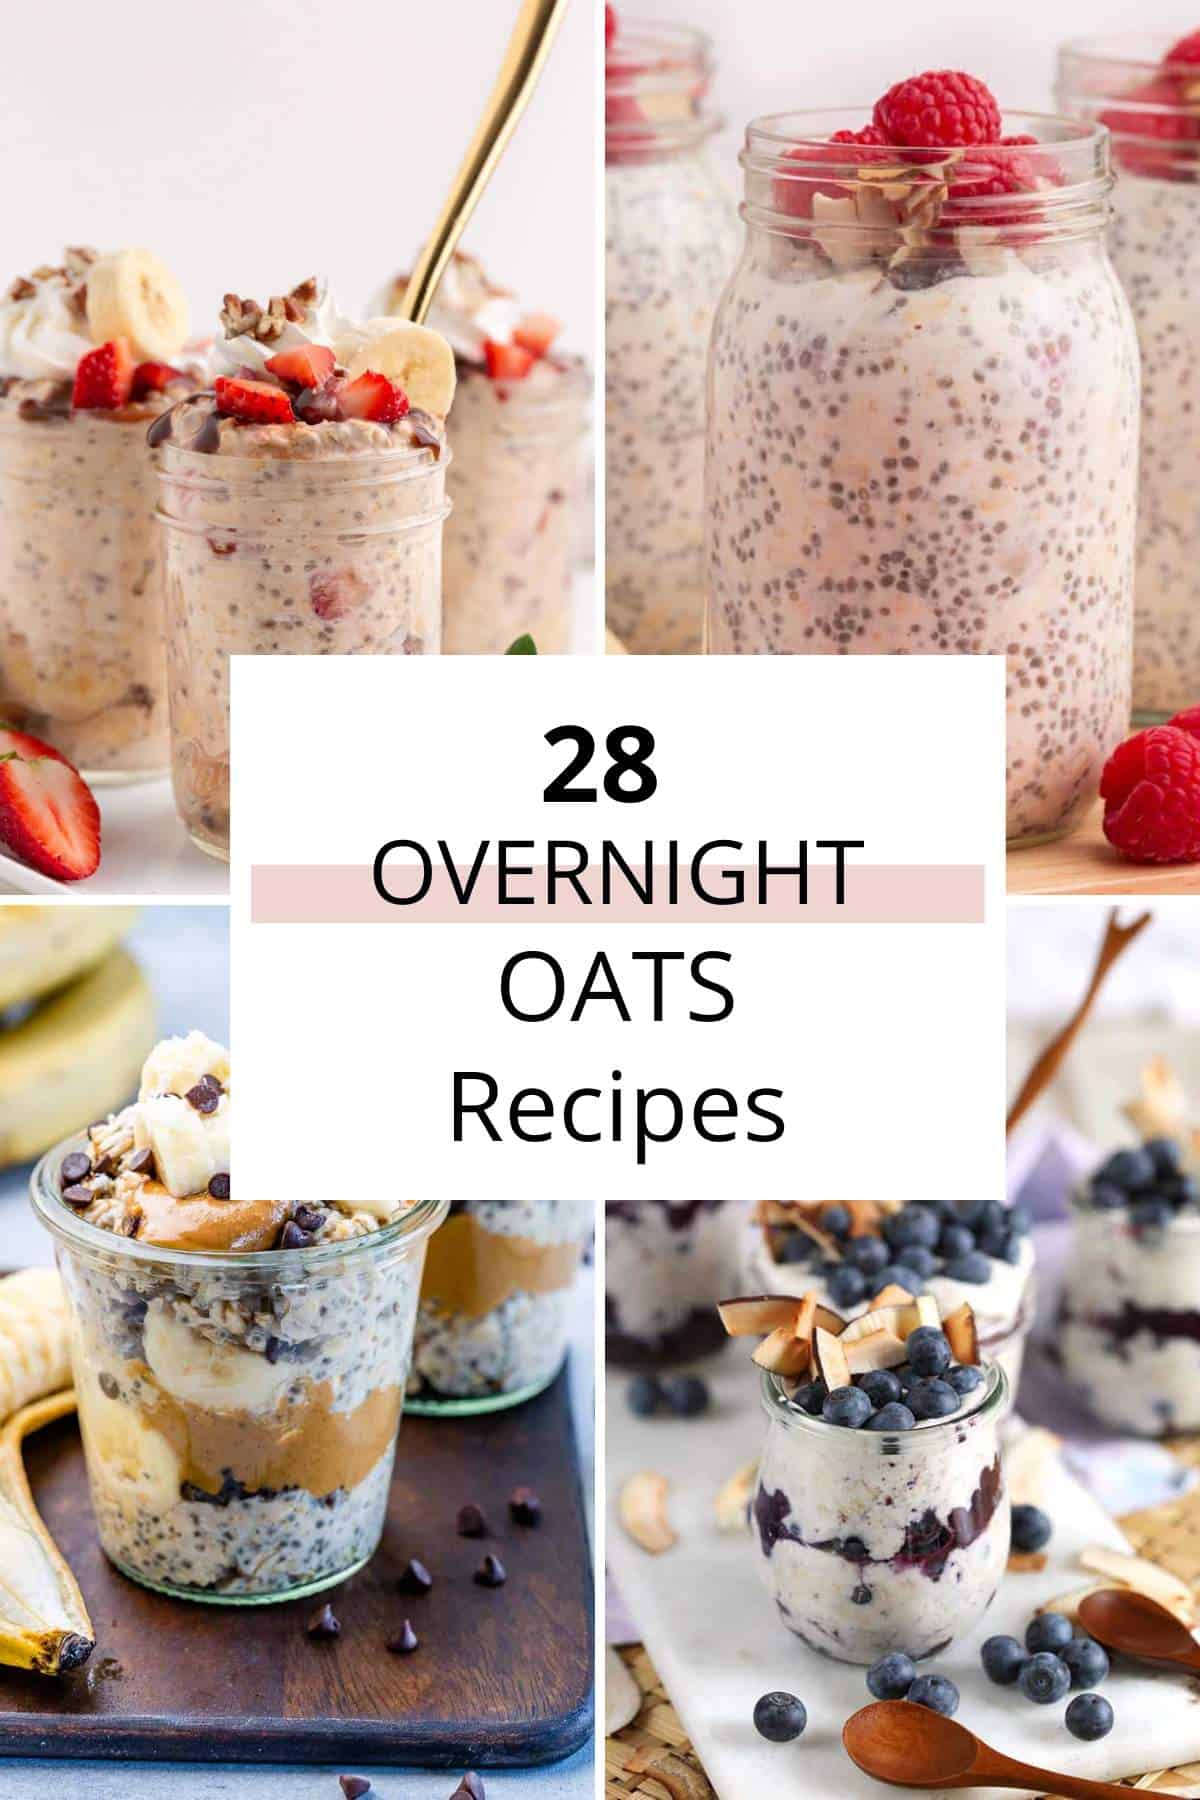 Discover 28 delicious overnight oats recipes to start your mornings off right. From classic flavors to unique combinations, these recipes are guaranteed to make your breakfasts more enjoyable.